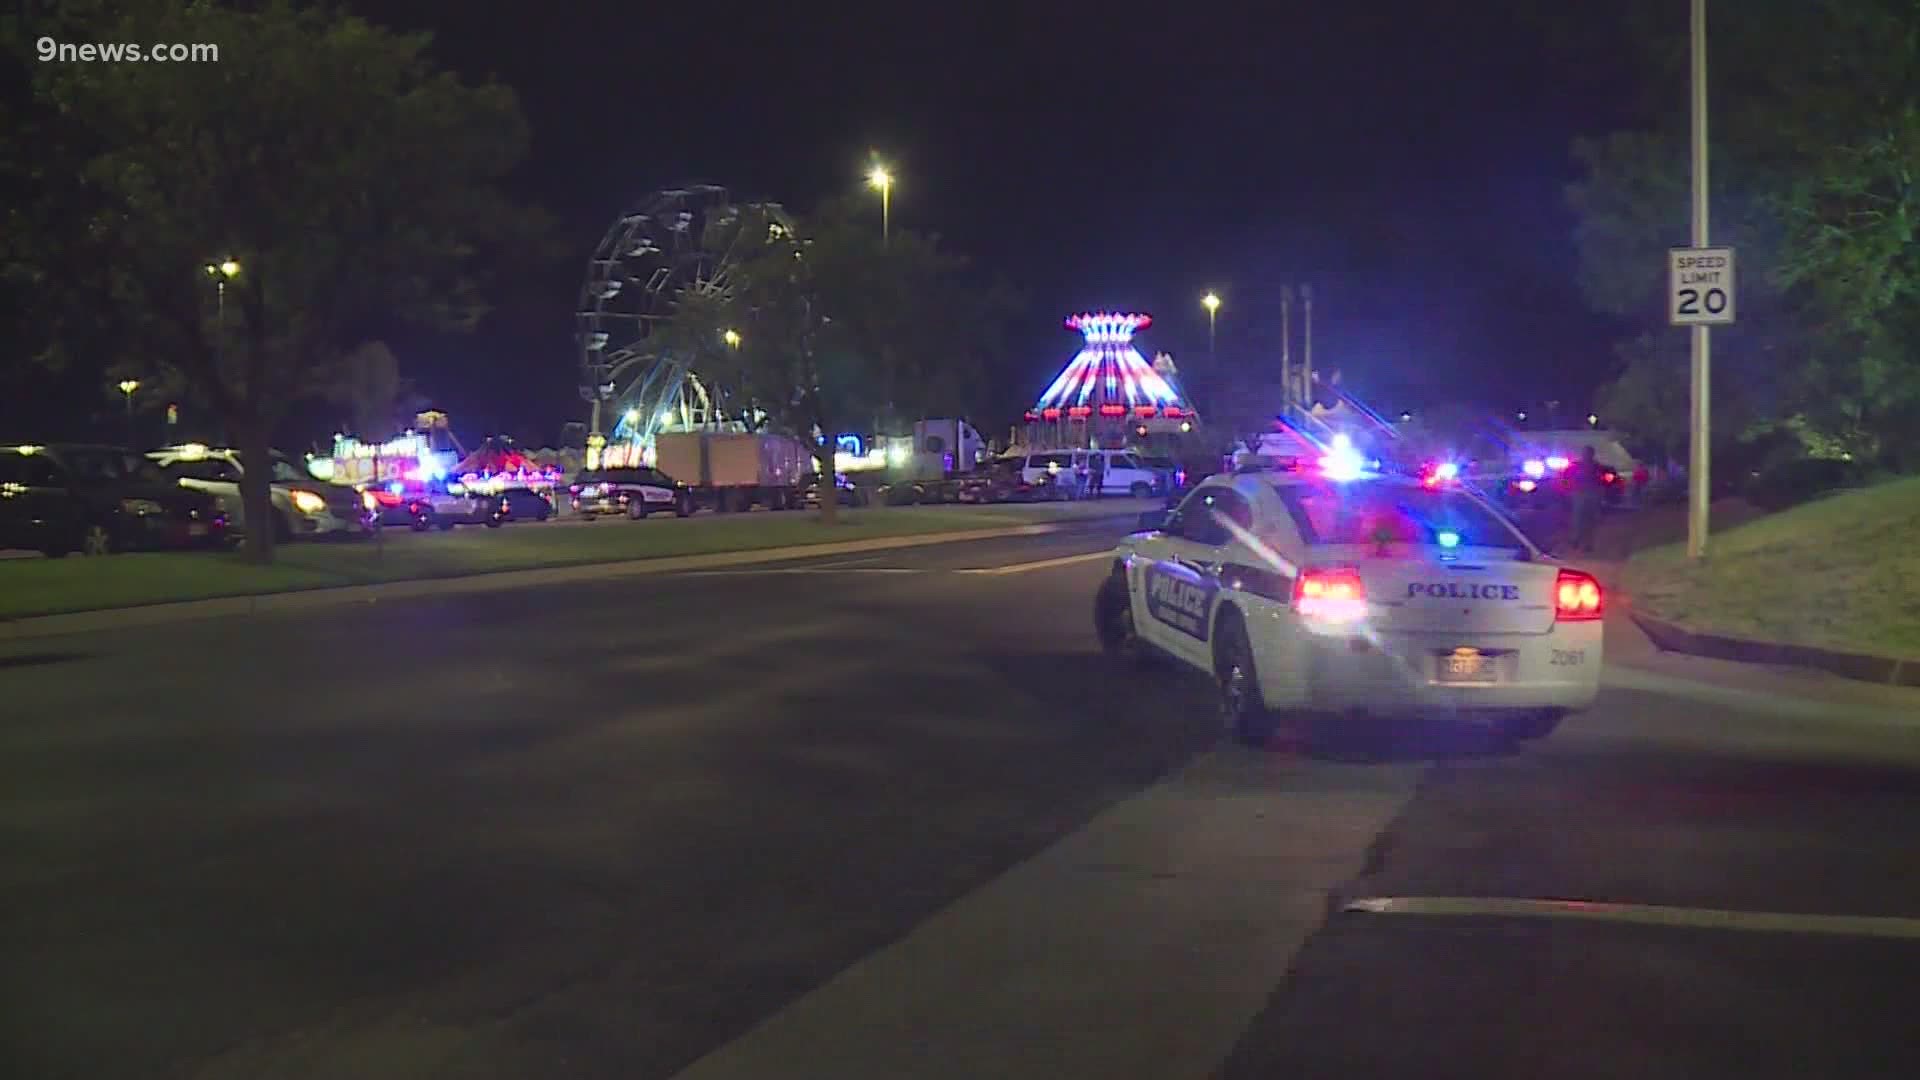 One of the shootings happened at a carnival at the Citadel Mall, and the other was in the parking lot of a restaurant across the street.